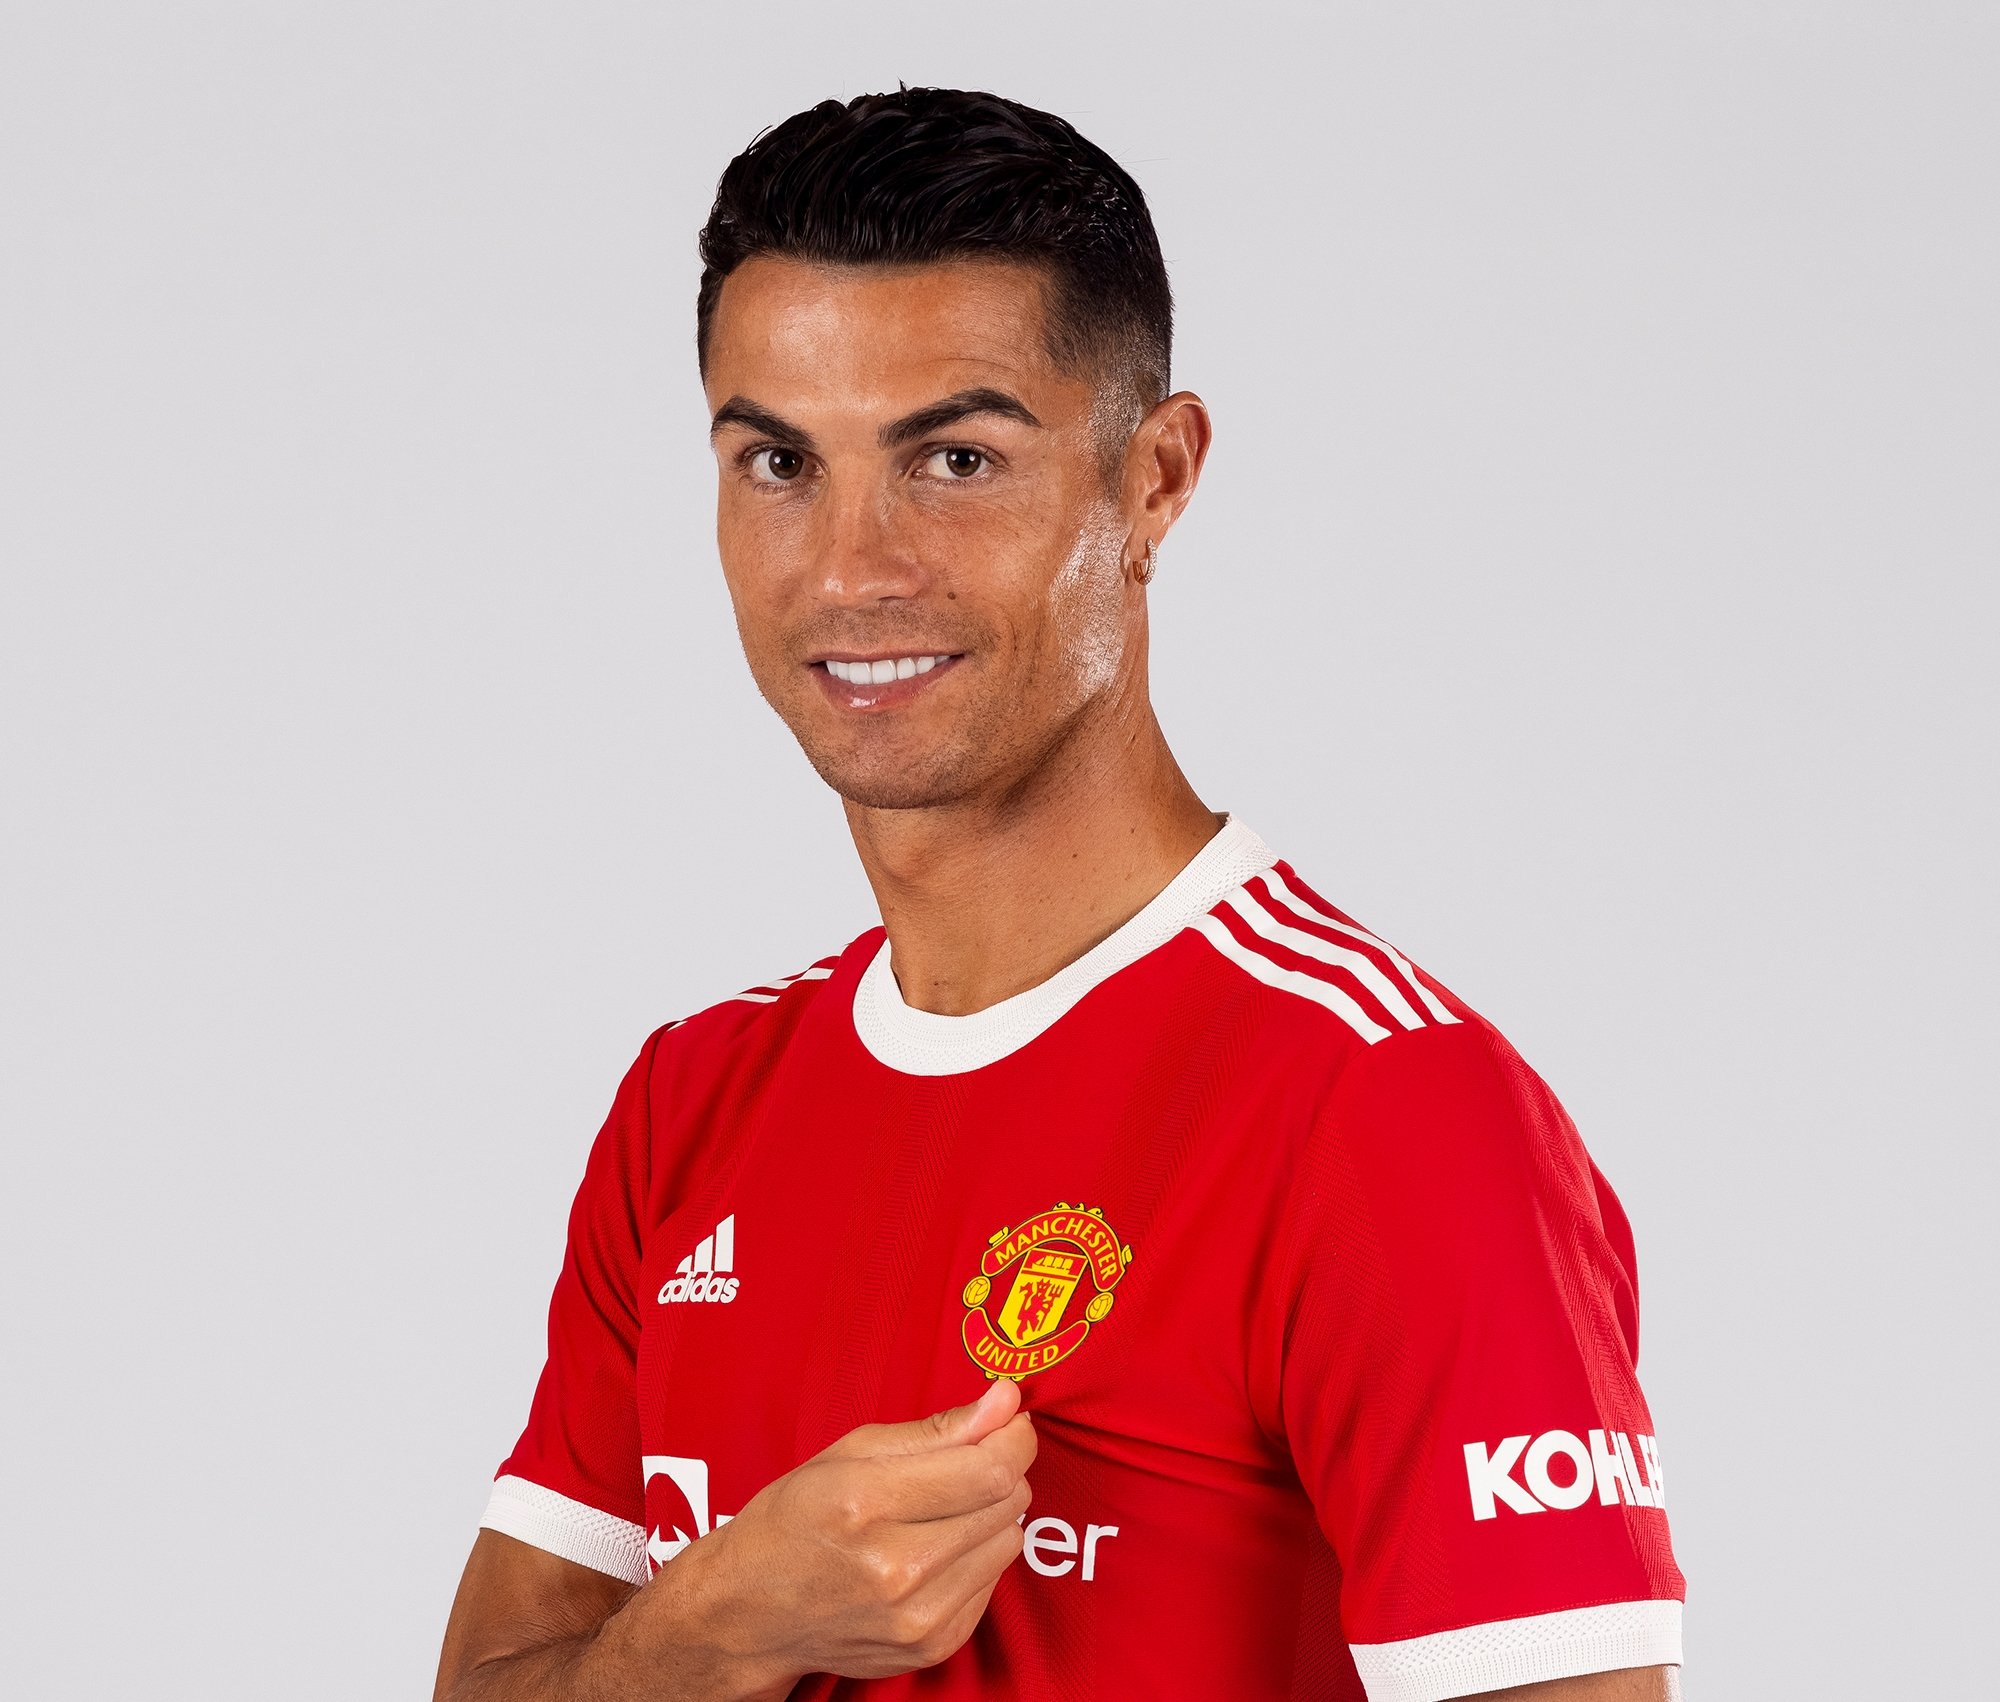 Cristiano Ronaldo, who owns private jets, poses for photo after signing with Manchester United in 2021